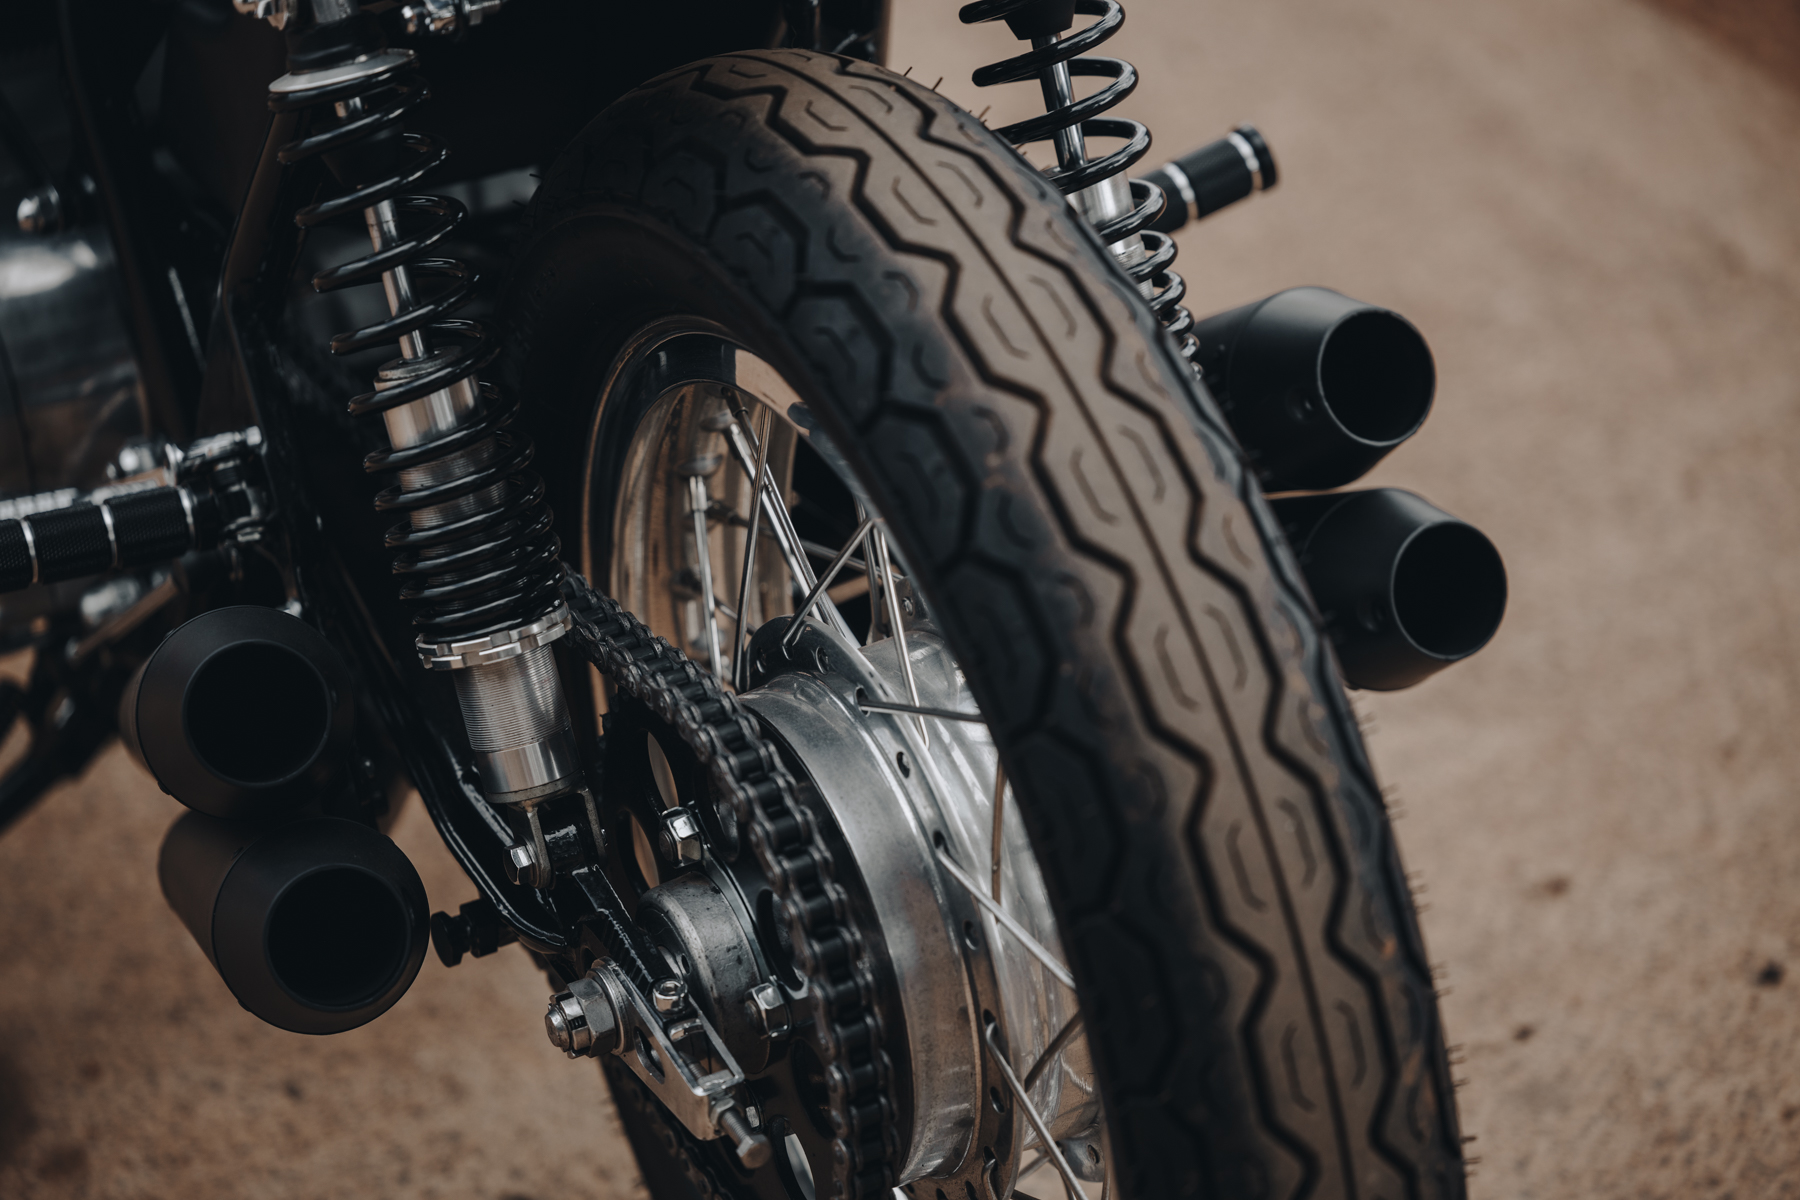 Detail photo of a Honda CB750 rear wheel and exhaust pipes